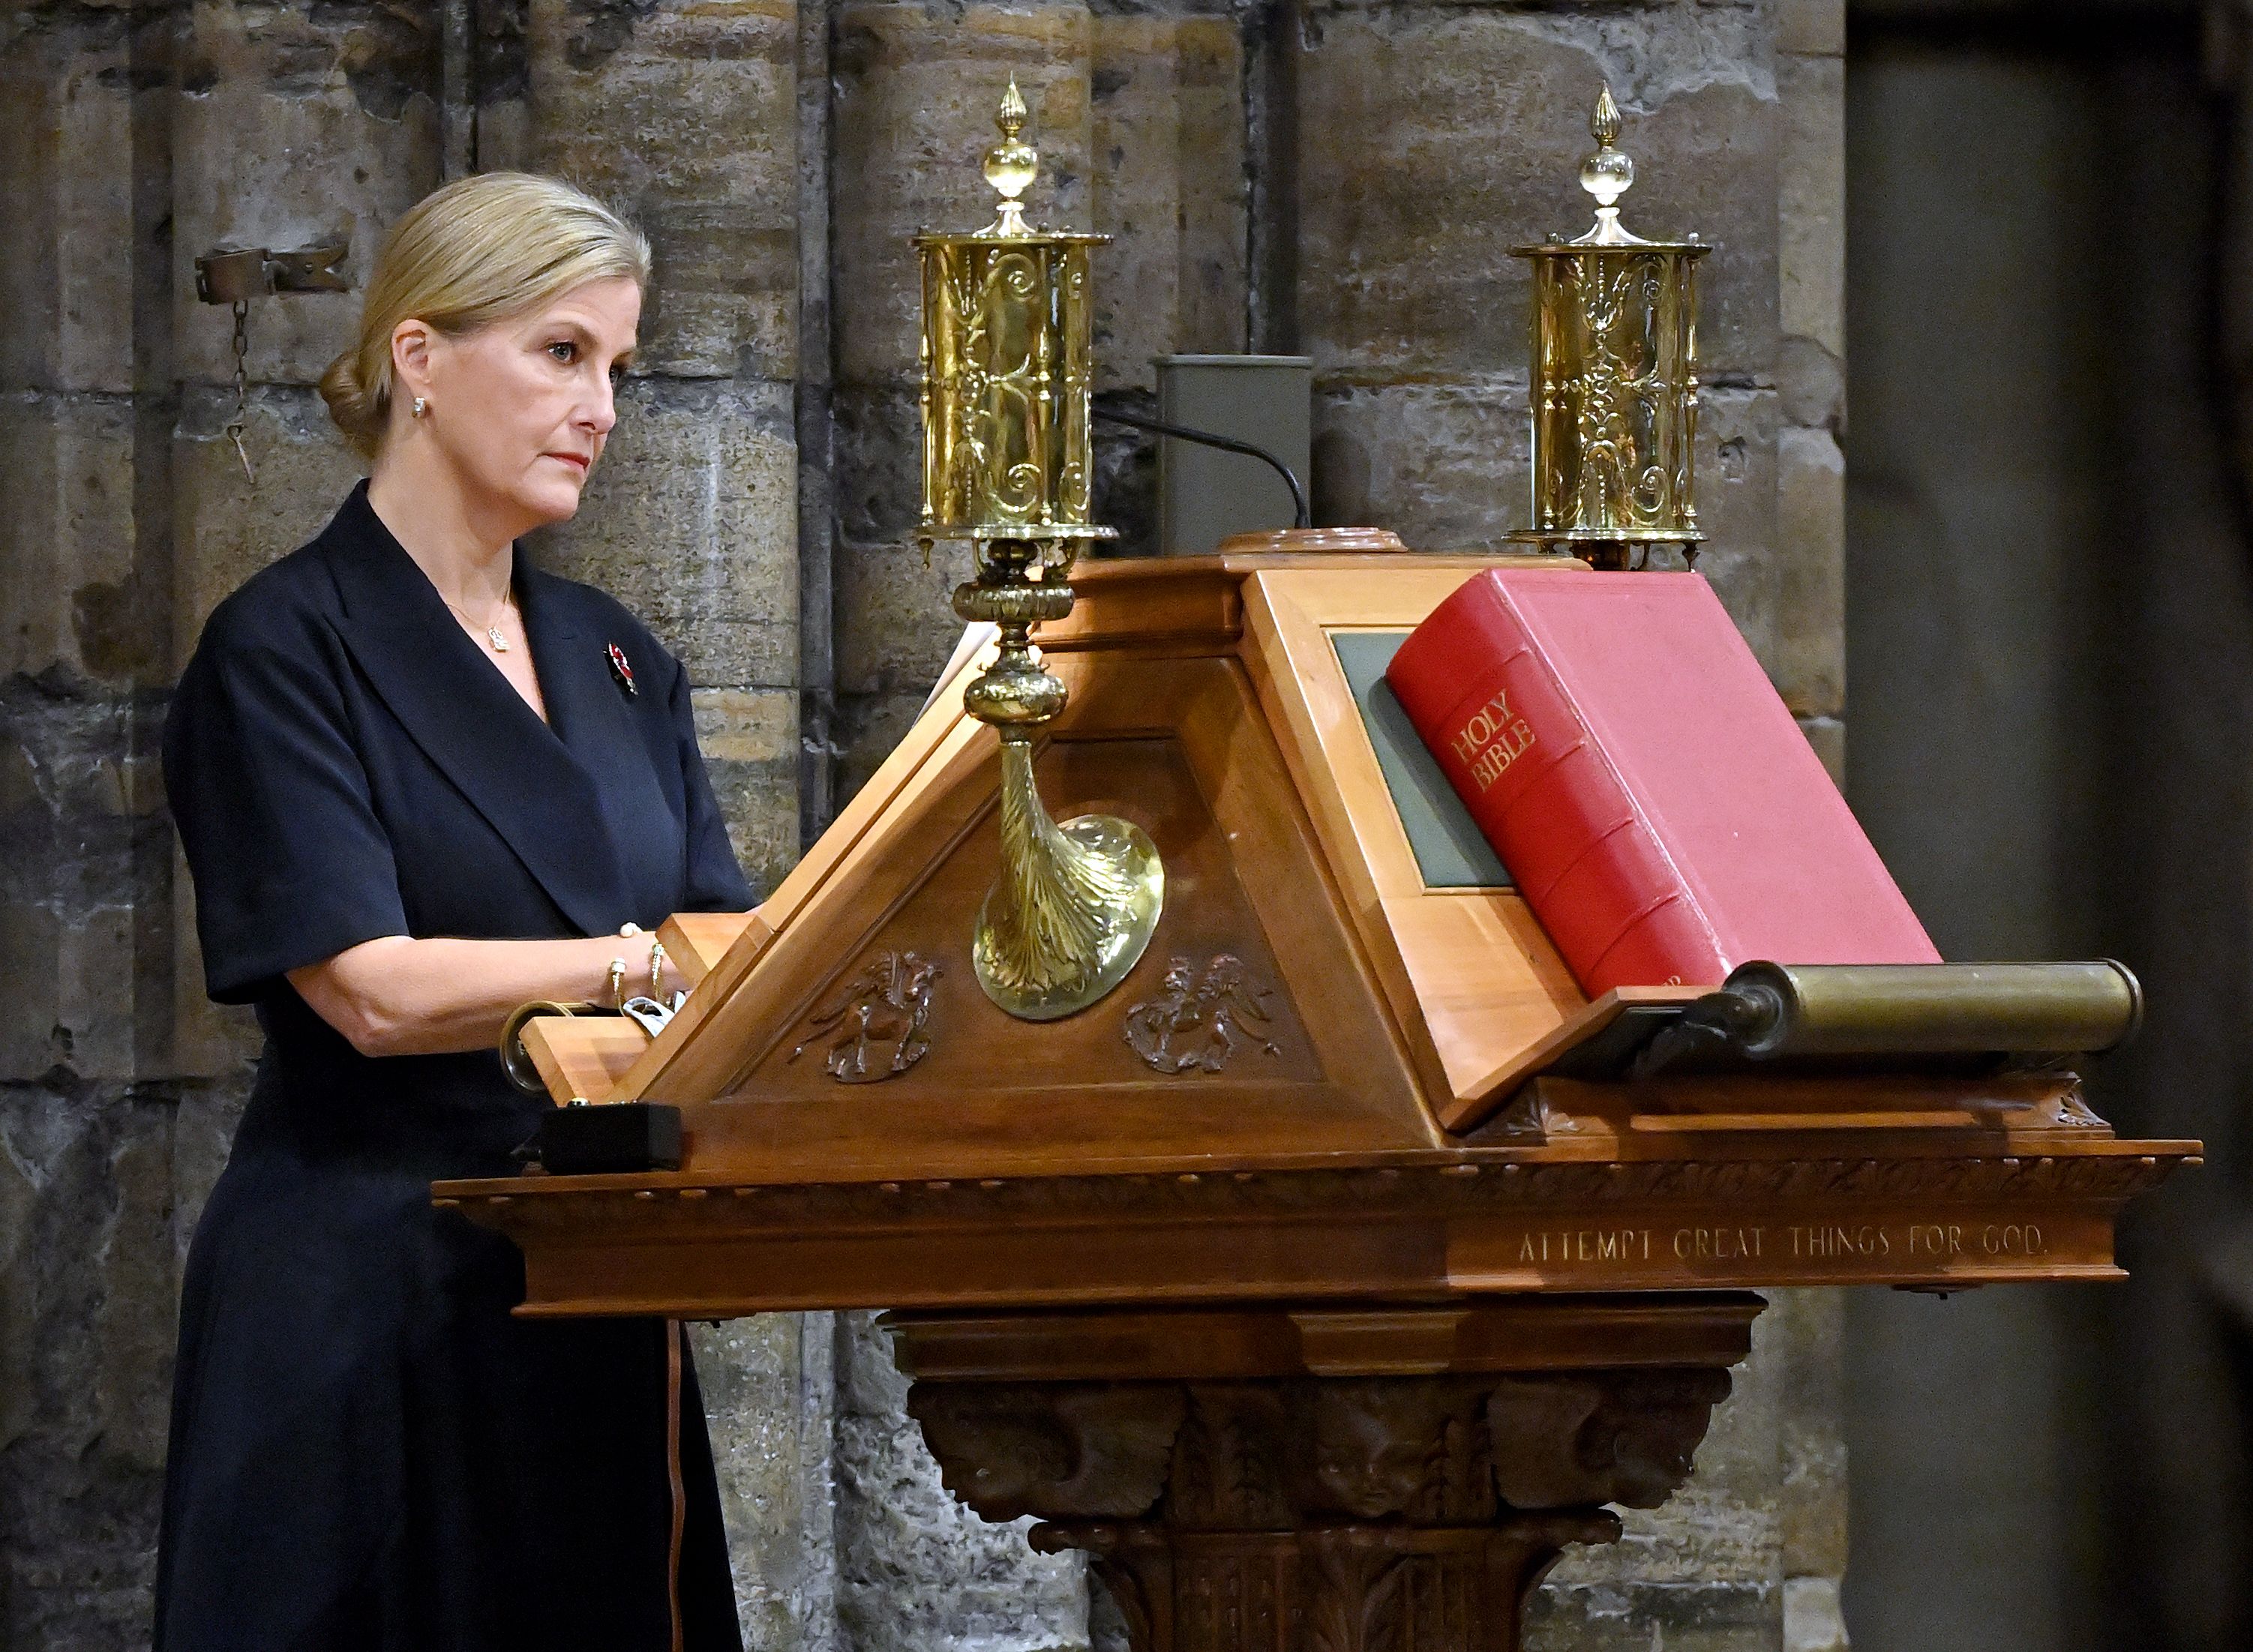 Sophie, Countess of Wessex attends the Sung Eucharist for All Souls' Day service at Westminster Abbey on November 2, 2020 | Getty Image